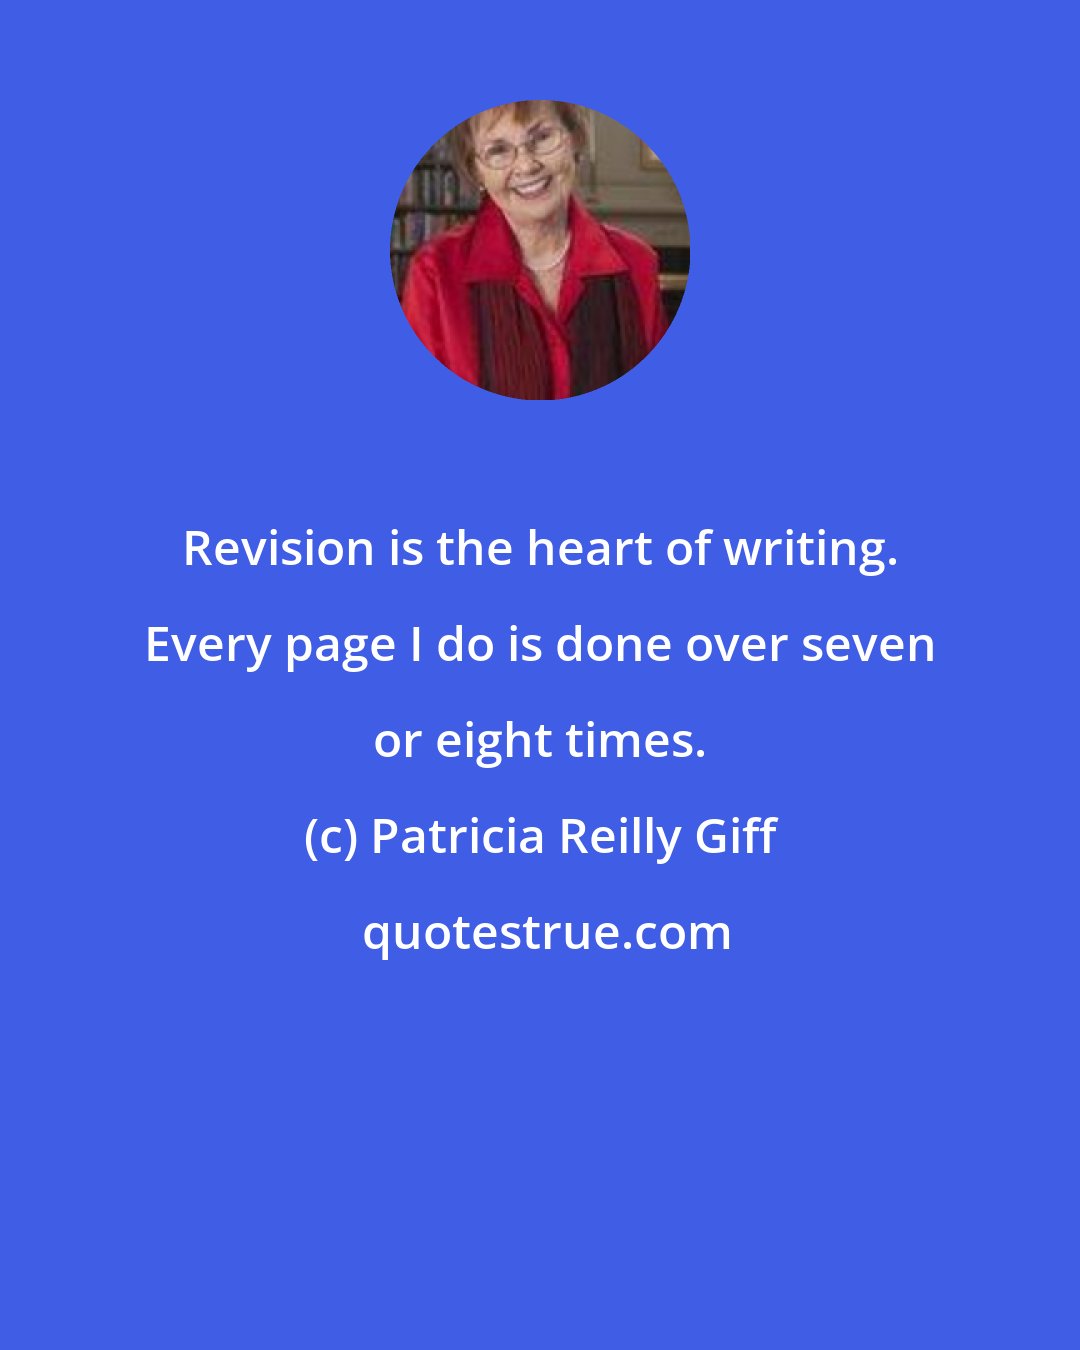 Patricia Reilly Giff: Revision is the heart of writing. Every page I do is done over seven or eight times.